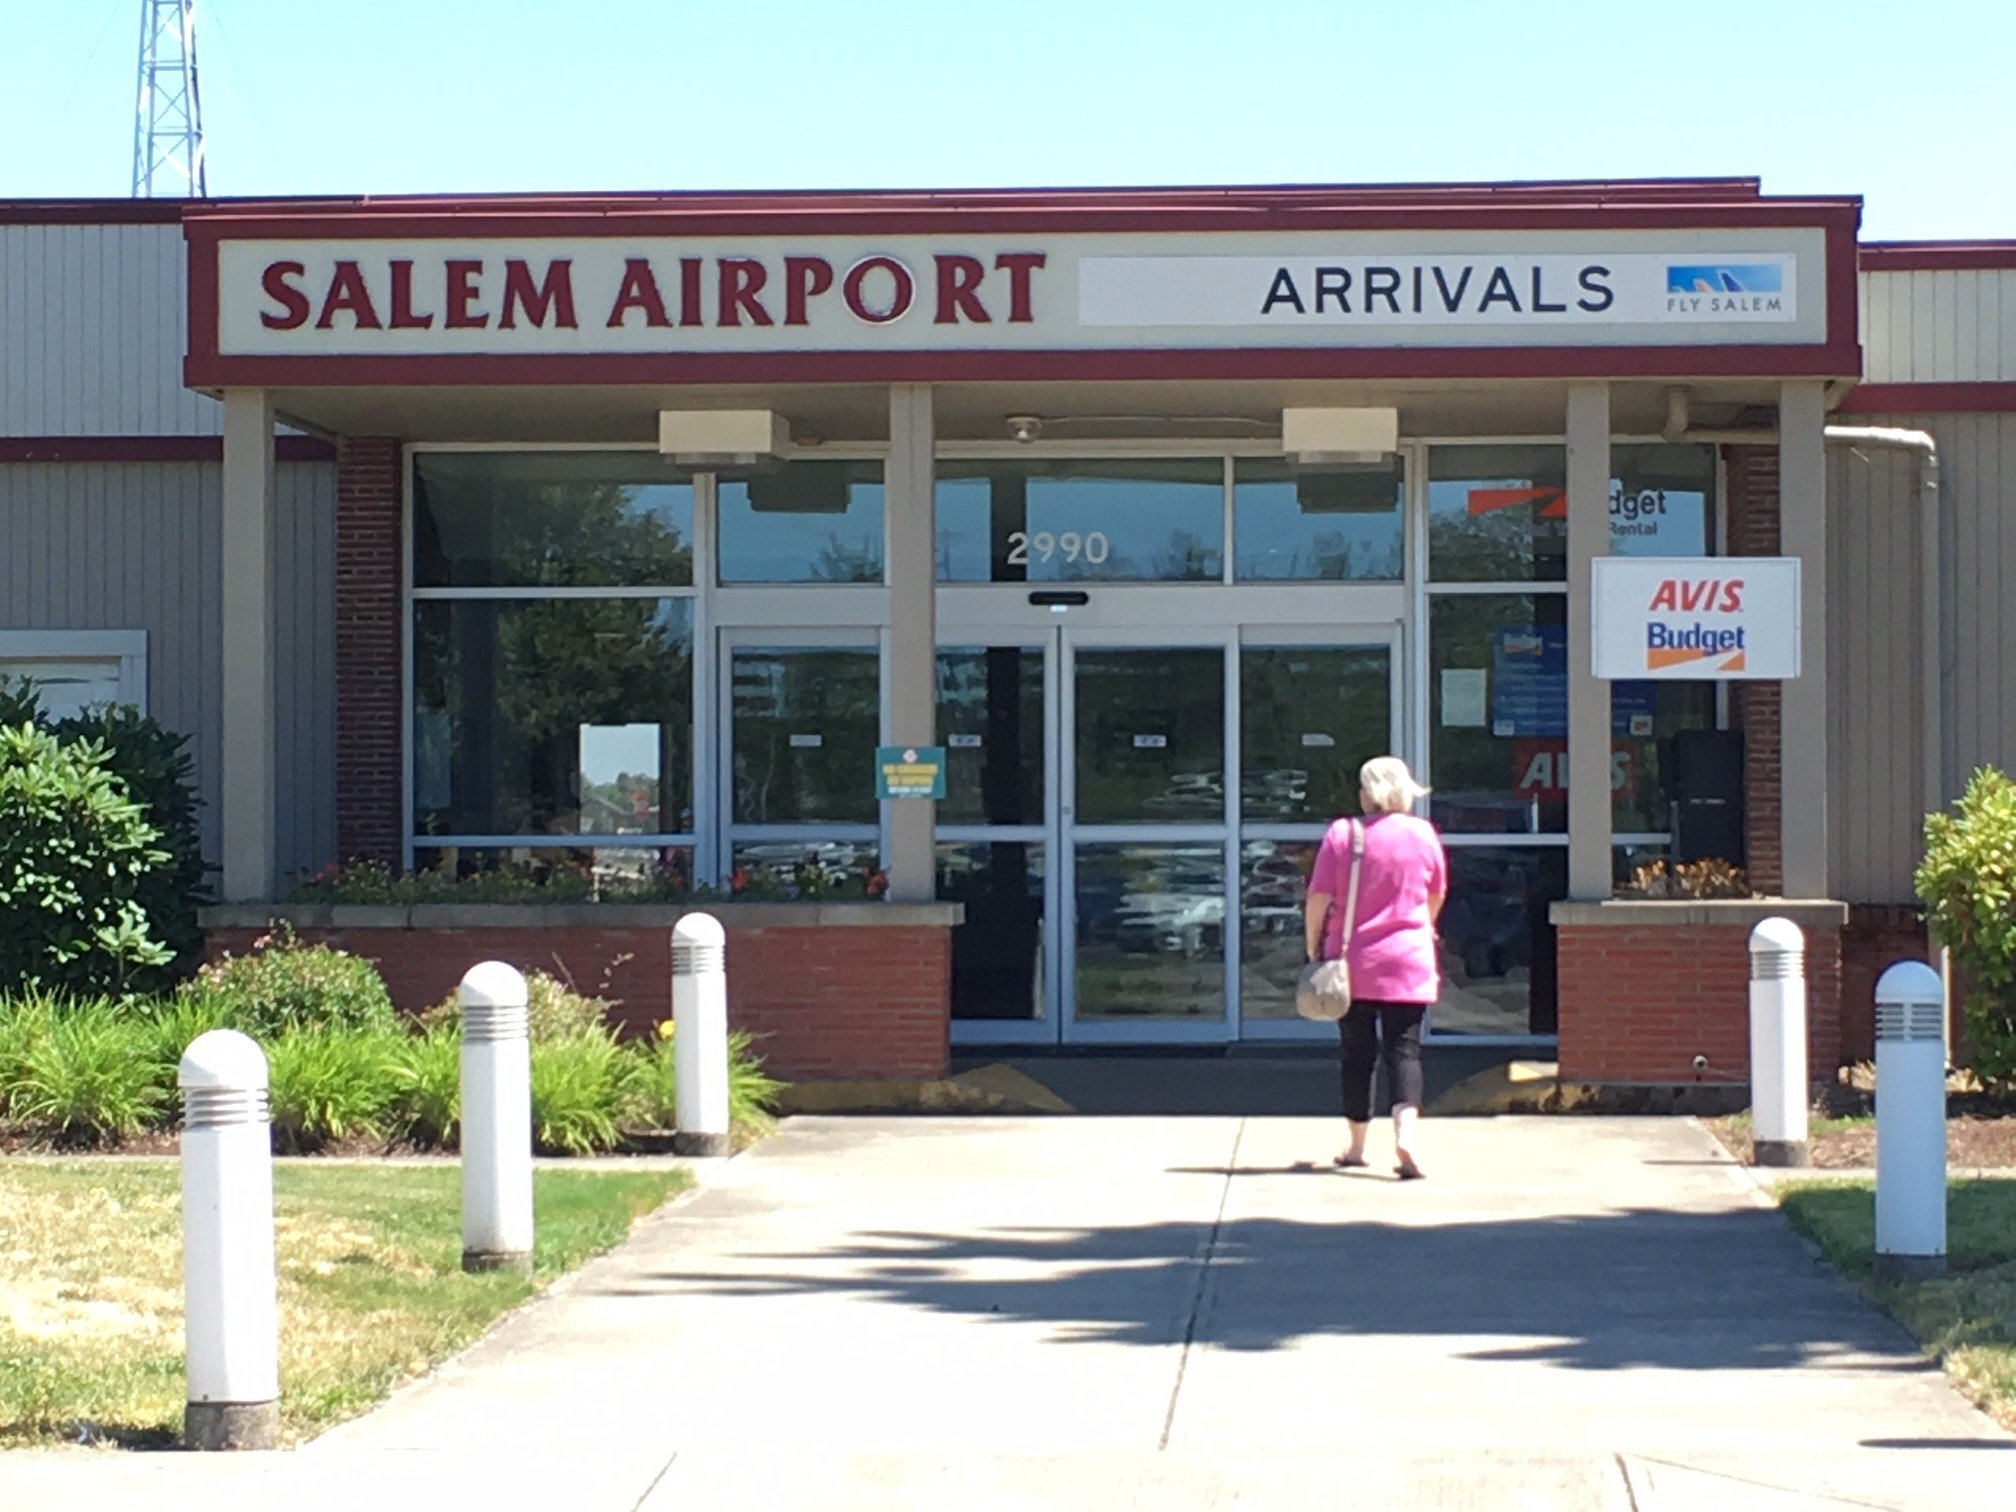 Salem airport gearing up for extra air traffic for solar eclipse KPTV